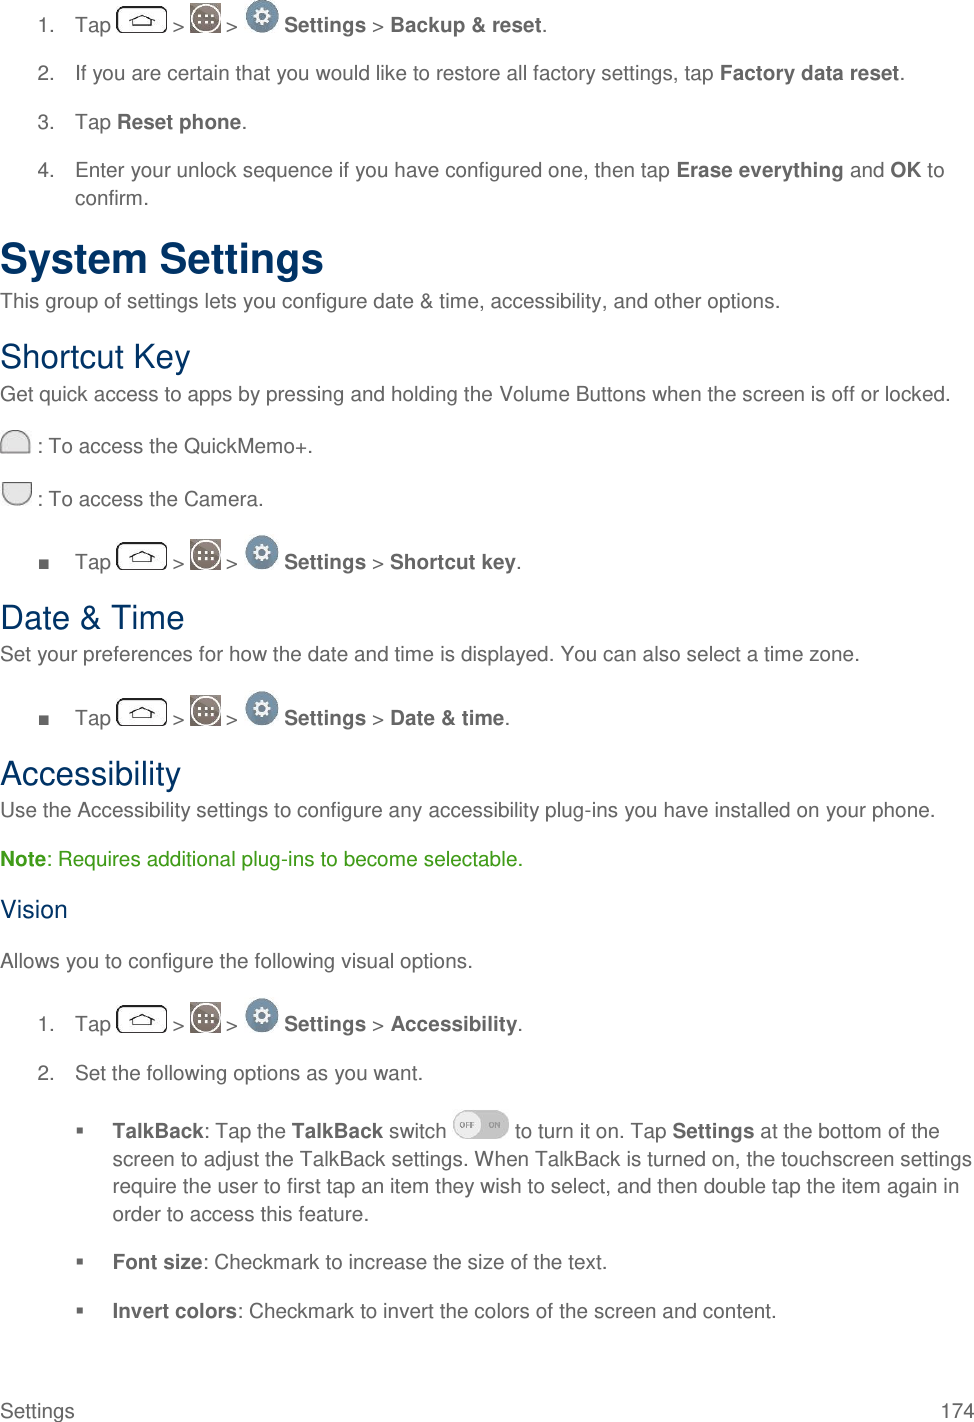 Settings  174 1.  Tap   &gt;   &gt;   Settings &gt; Backup &amp; reset. 2.  If you are certain that you would like to restore all factory settings, tap Factory data reset. 3.  Tap Reset phone. 4.  Enter your unlock sequence if you have configured one, then tap Erase everything and OK to confirm. System Settings This group of settings lets you configure date &amp; time, accessibility, and other options. Shortcut Key Get quick access to apps by pressing and holding the Volume Buttons when the screen is off or locked.  : To access the QuickMemo+.  : To access the Camera. ■  Tap   &gt;   &gt;   Settings &gt; Shortcut key. Date &amp; Time Set your preferences for how the date and time is displayed. You can also select a time zone. ■  Tap   &gt;   &gt;   Settings &gt; Date &amp; time. Accessibility Use the Accessibility settings to configure any accessibility plug-ins you have installed on your phone. Note: Requires additional plug-ins to become selectable. Vision Allows you to configure the following visual options. 1.  Tap   &gt;   &gt;   Settings &gt; Accessibility. 2.  Set the following options as you want.   TalkBack: Tap the TalkBack switch   to turn it on. Tap Settings at the bottom of the screen to adjust the TalkBack settings. When TalkBack is turned on, the touchscreen settings require the user to first tap an item they wish to select, and then double tap the item again in order to access this feature.  Font size: Checkmark to increase the size of the text.  Invert colors: Checkmark to invert the colors of the screen and content.  